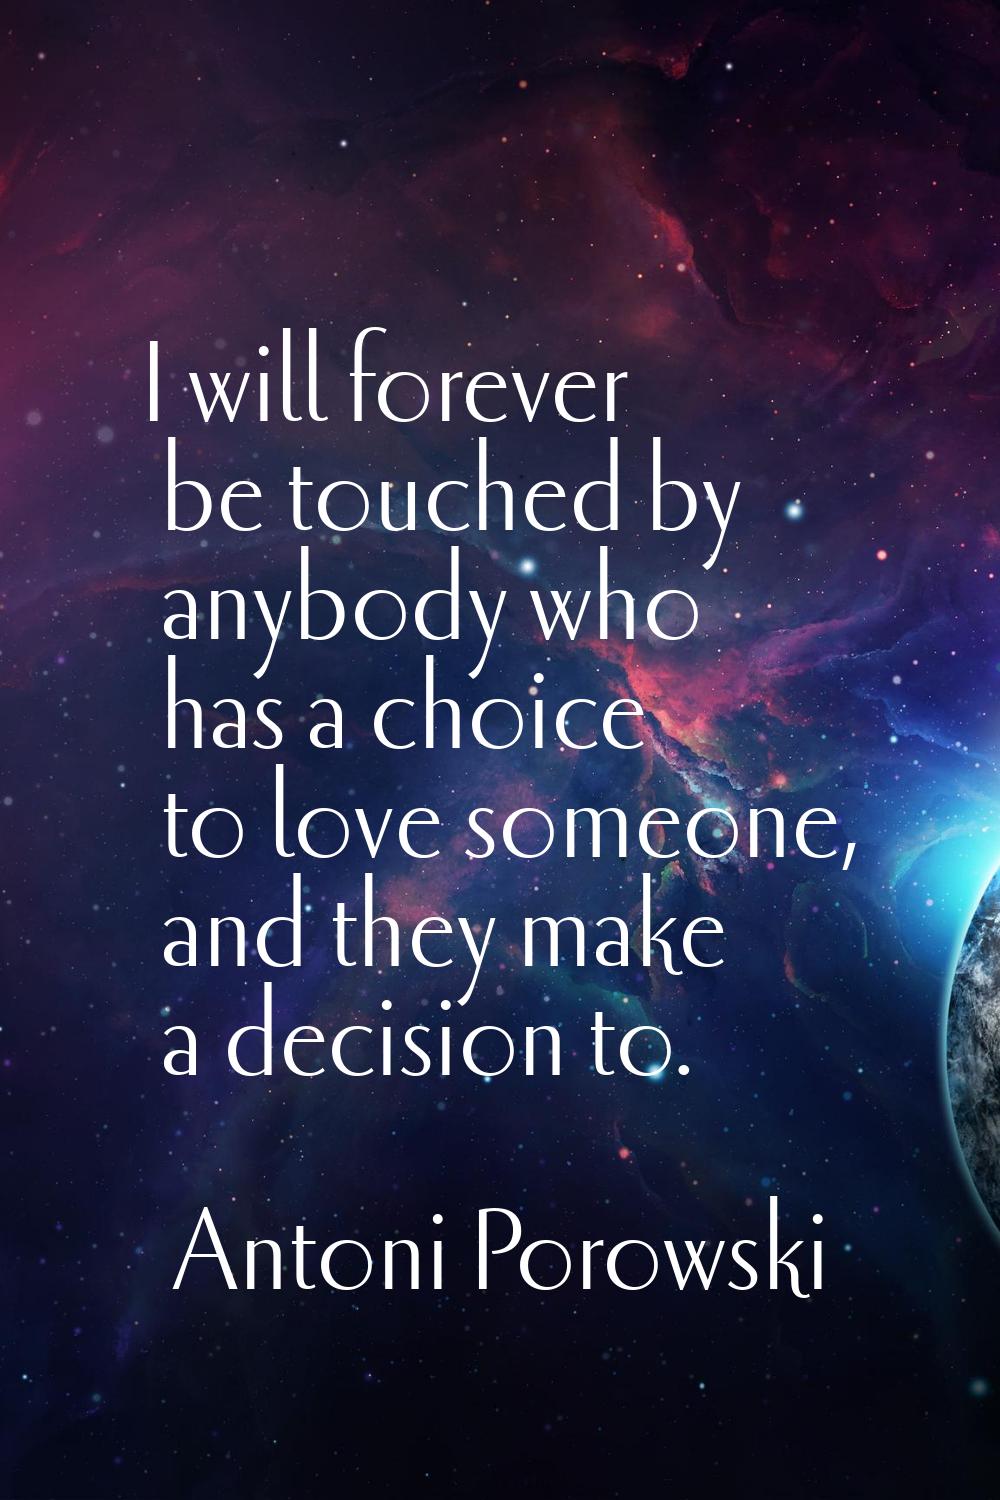 I will forever be touched by anybody who has a choice to love someone, and they make a decision to.